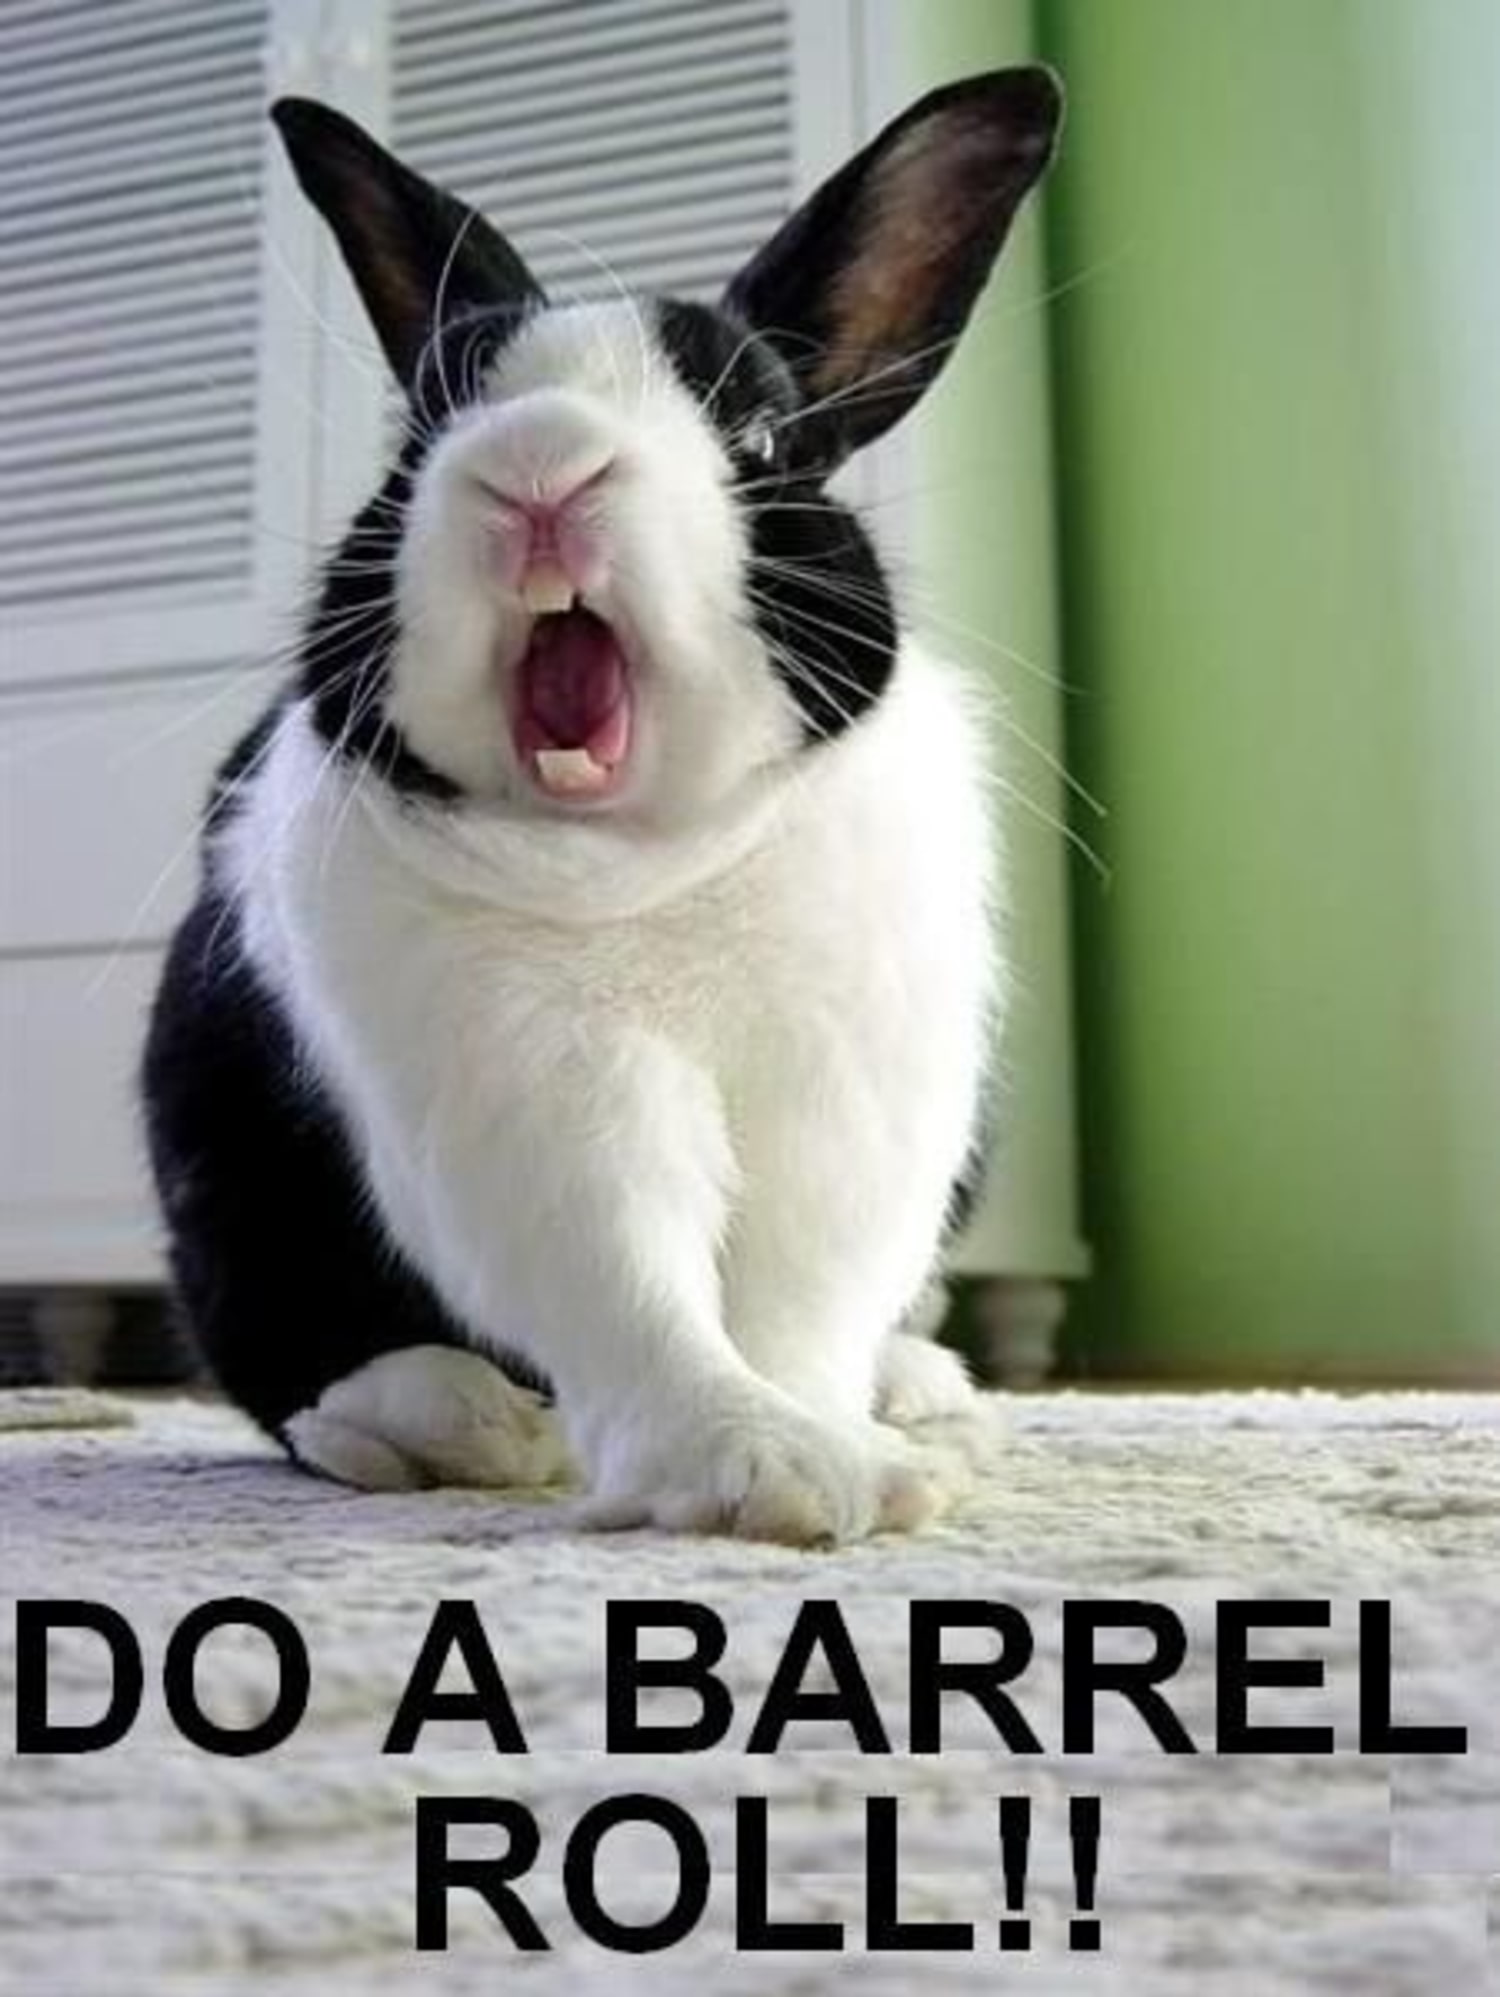 Why does Google do a barrel roll when you search 'do a barrel roll